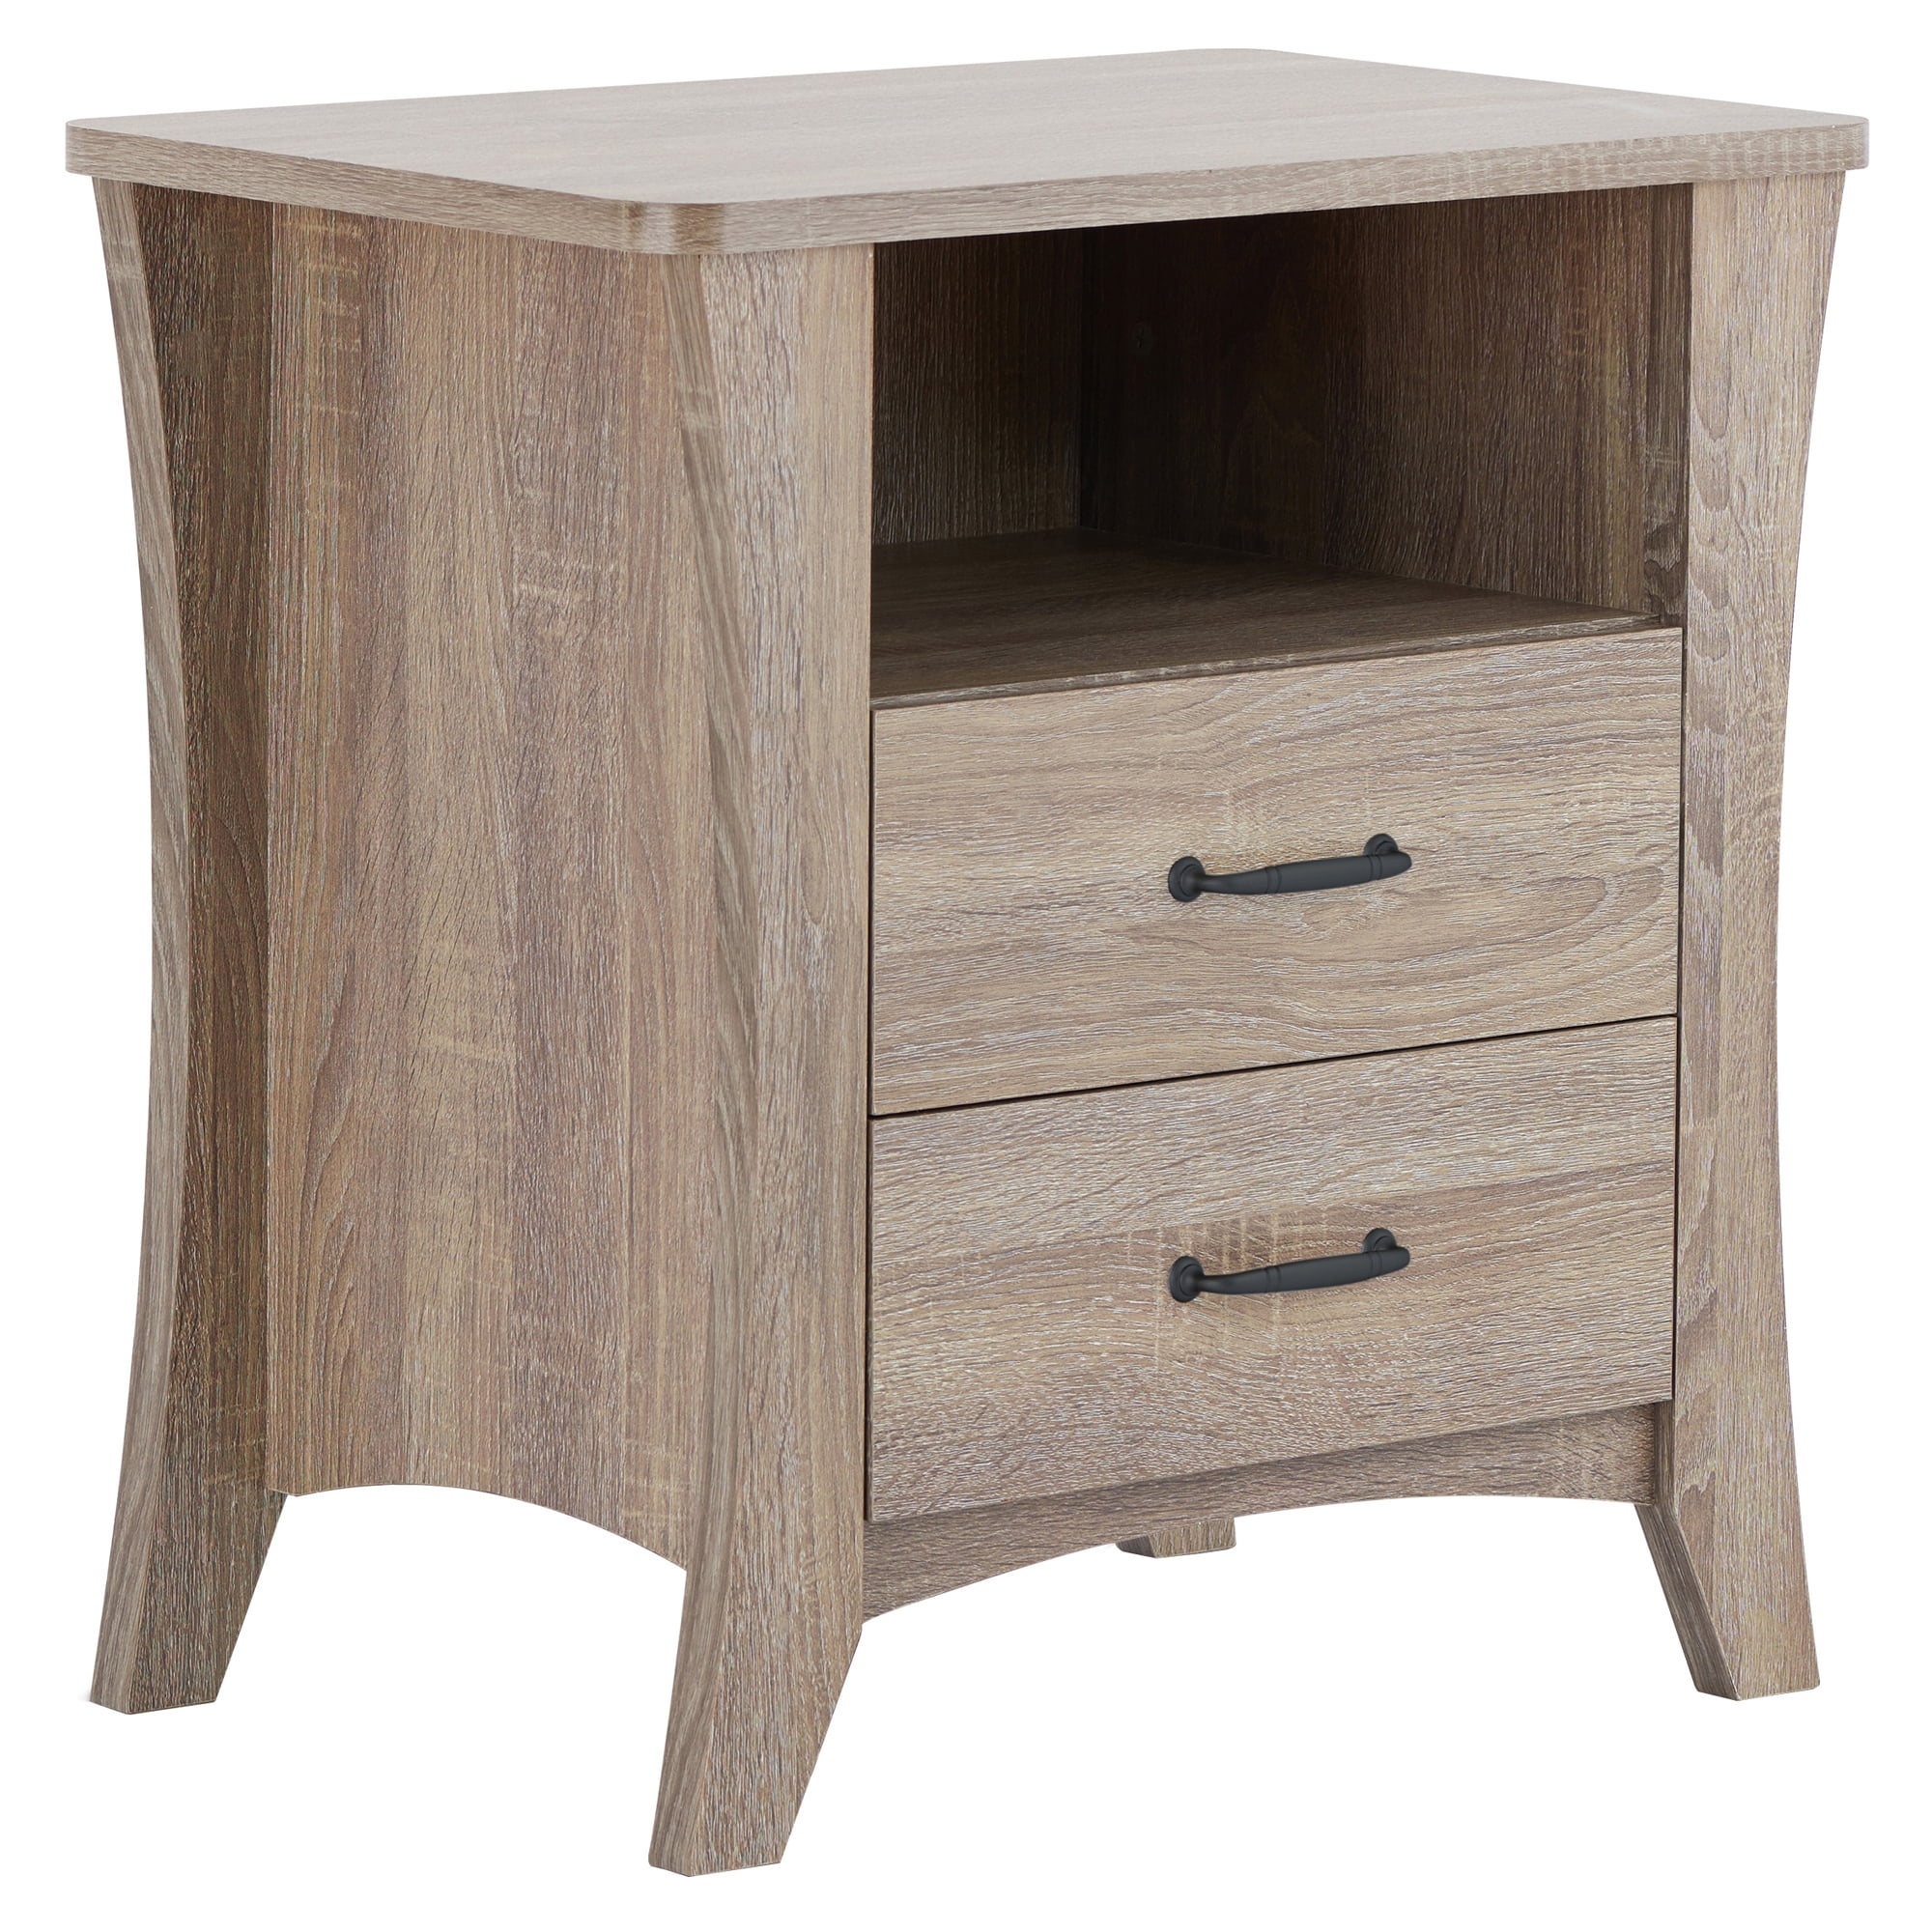 Picture of ACME 97262 Rectangular Colt Nightstand - Rustic Natural - 24 x 24 x 16 in.